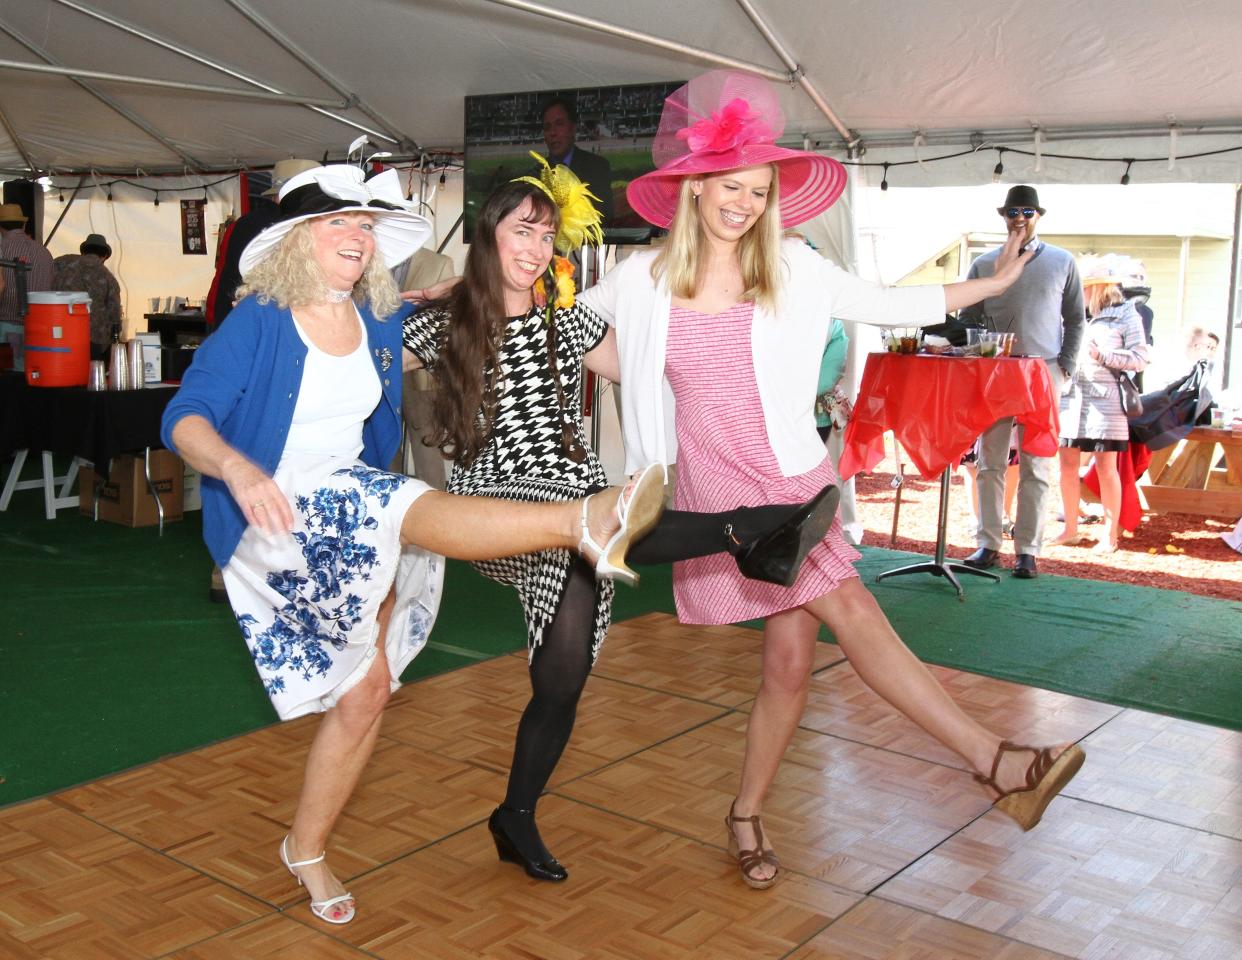 From left, Jenny Nelson, Nancy Shue, and Ann Wallace kick up their heels to the Beer Barrel Polka at a Maxie's Derby Day party.